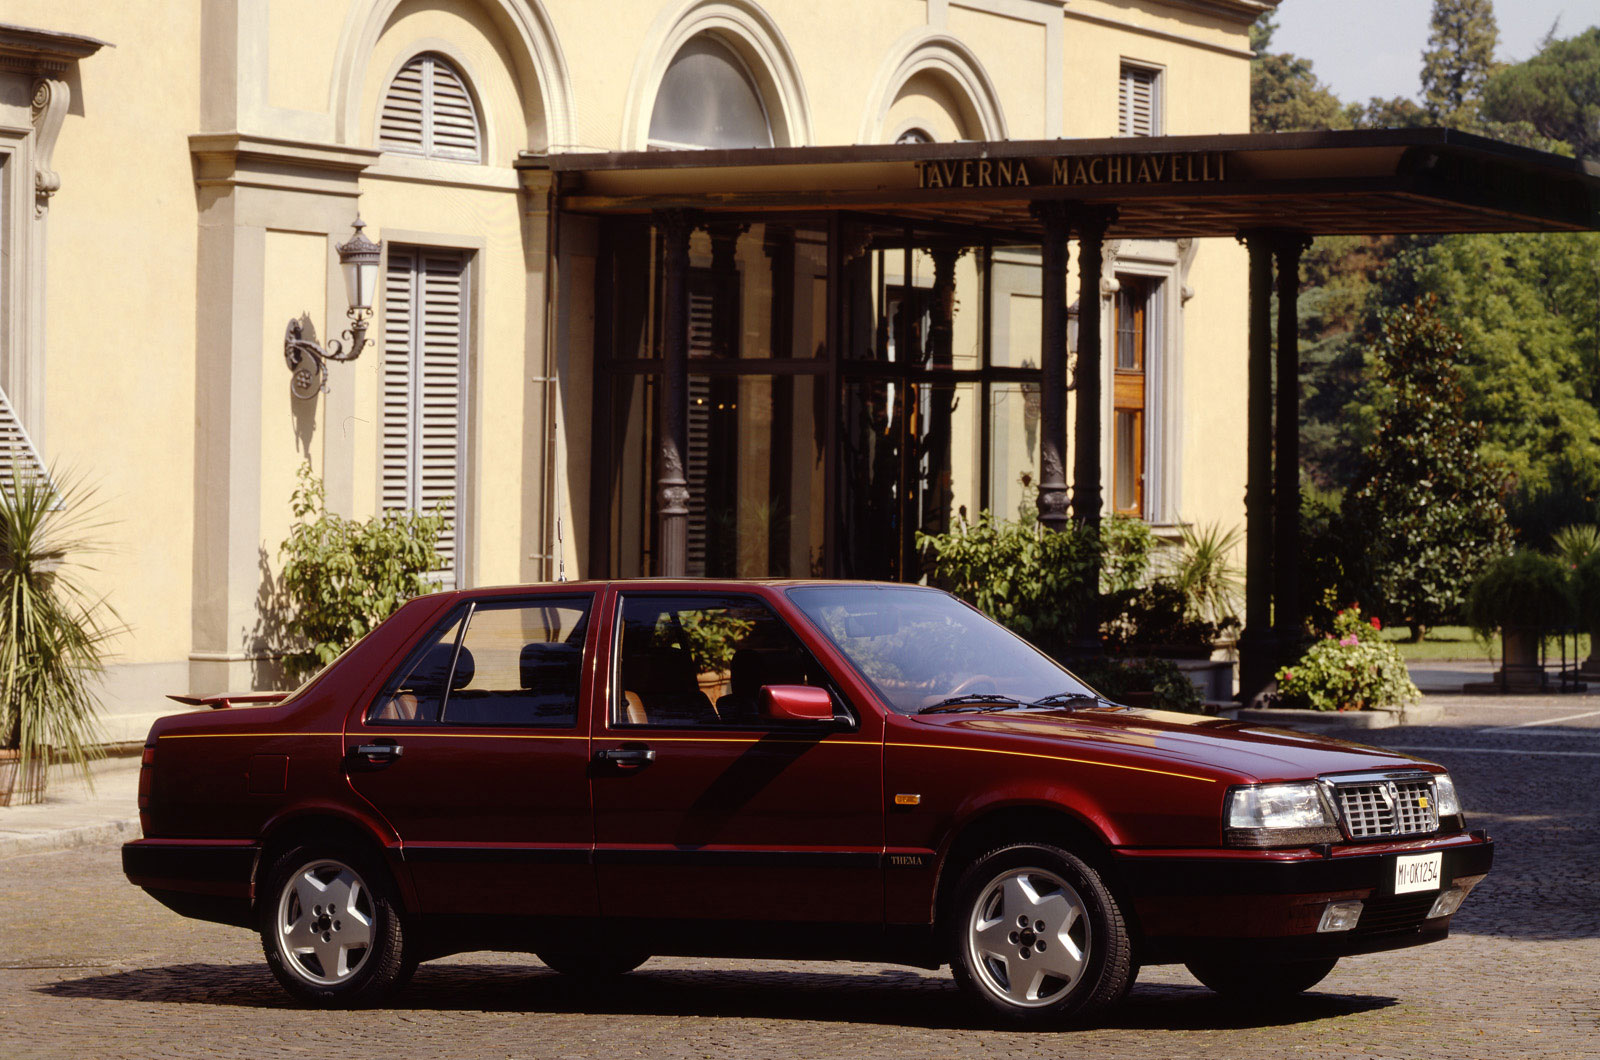 <p>We've got used to active aerodynamics, with pop-up spoilers now par for the course on high-performance sports cars. But it was Lancia that was the first to build a car with such tech as standard, with its fabulously bonkers Thema 8.32 (8 cylinders, 32 valves). Powered by a <strong>V8</strong> derived from the one seen in the Ferrari 308, the left-hand drive-only Thema 8.32 had just 212bhp – which wasn't much more than the 185bhp of the far cheaper four-cylinder Thema 2.0 Turbo.</p><p><strong>GROUNDBREAKER SCORE: 5 </strong>– becoming much more common.</p>